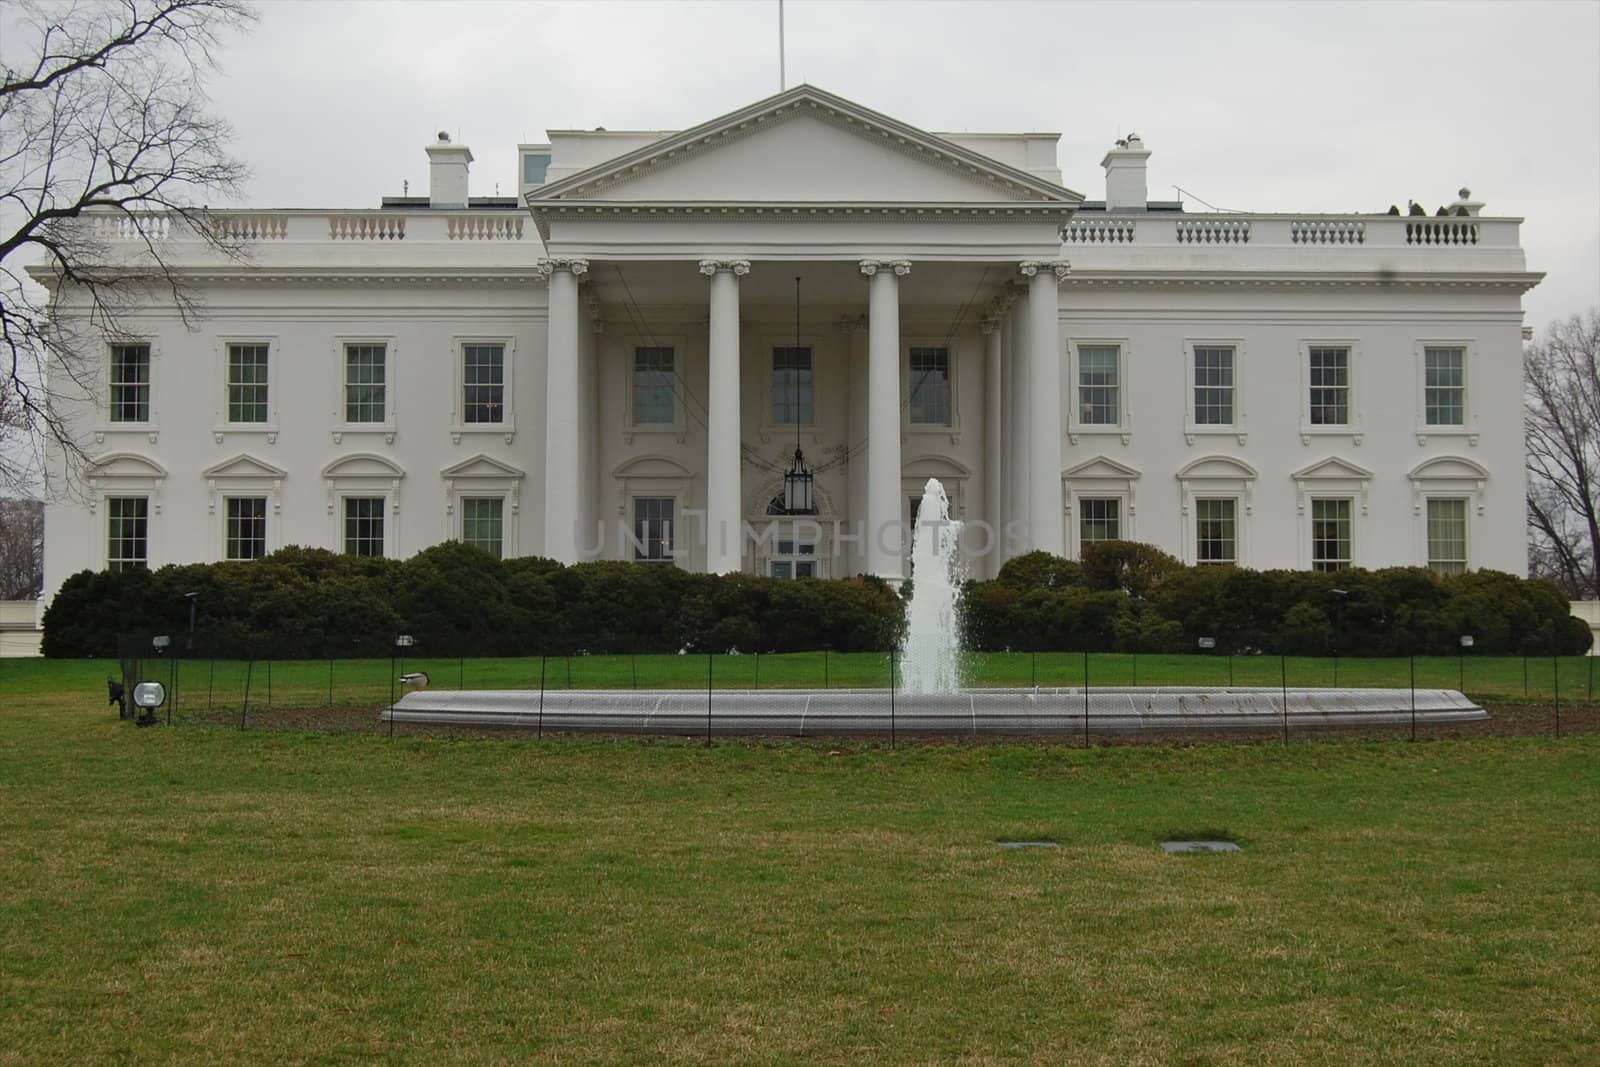 The White House, as seen from Pennsylvania Avenue.